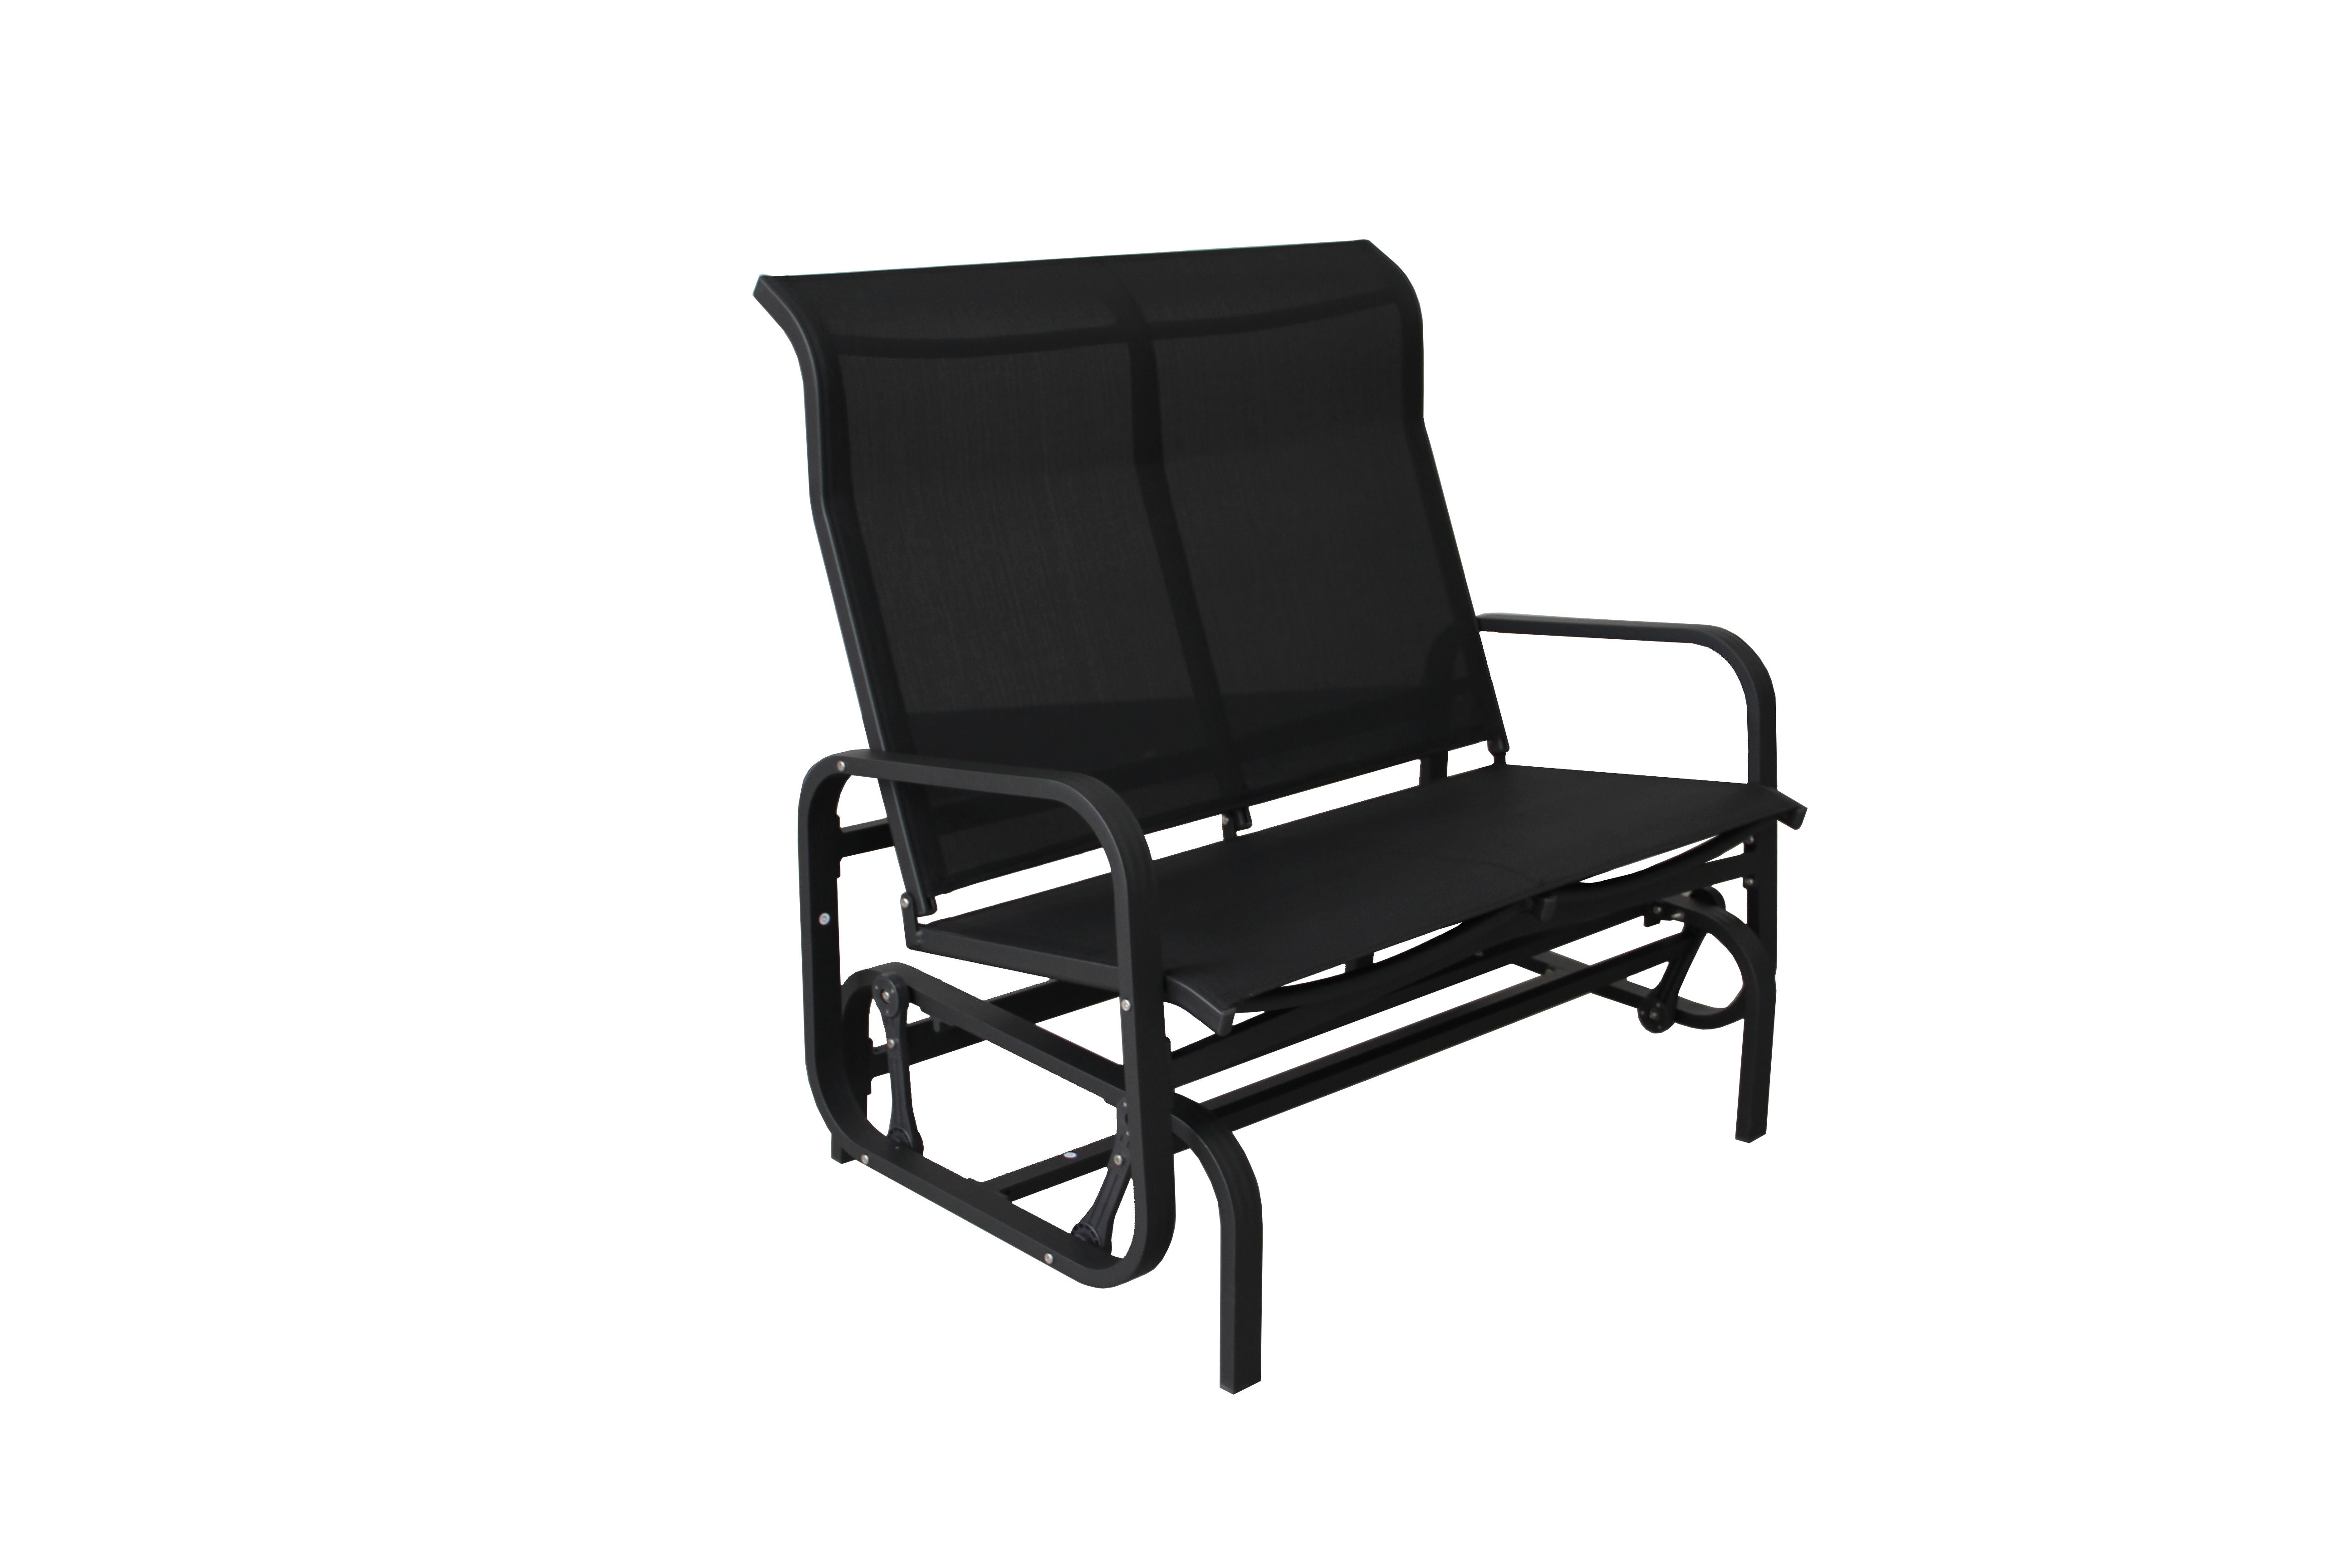 PatioZone 2-Seater Oscillating Chair in Textilene with Aluminum Frame (PZ-SN23-021) - Black